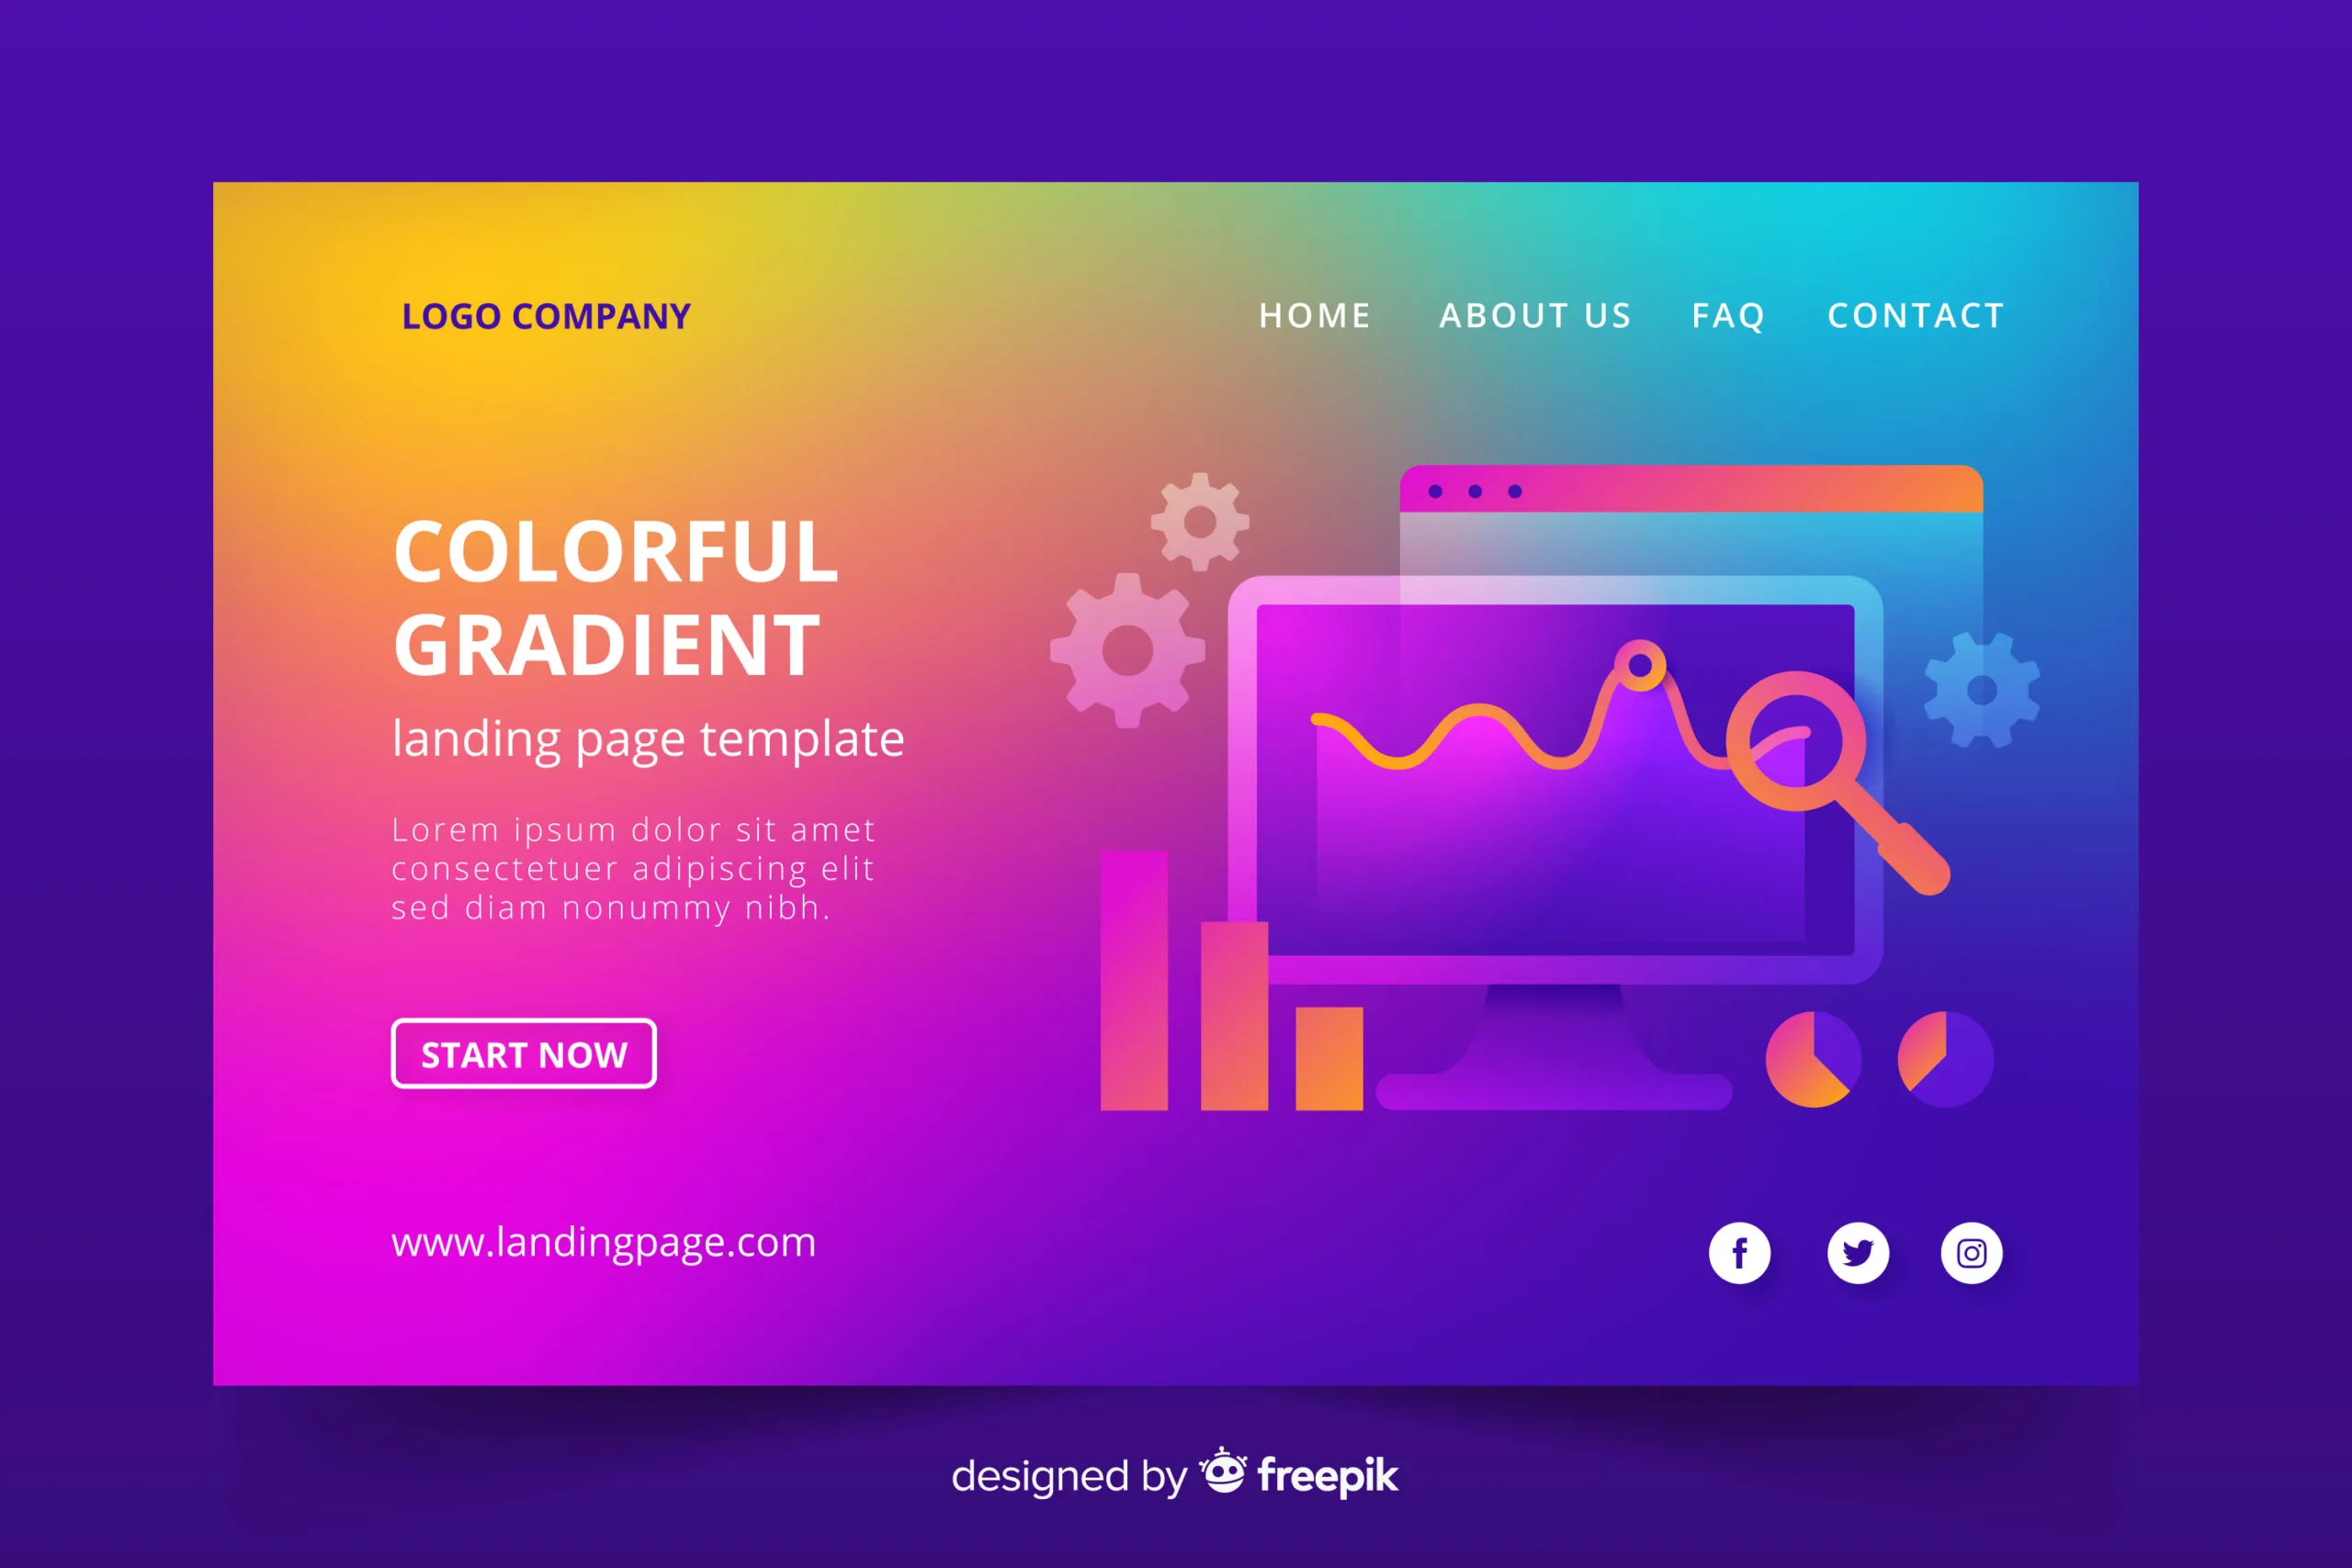 5 Dynamic Website Color Schemes and Trends for 2023